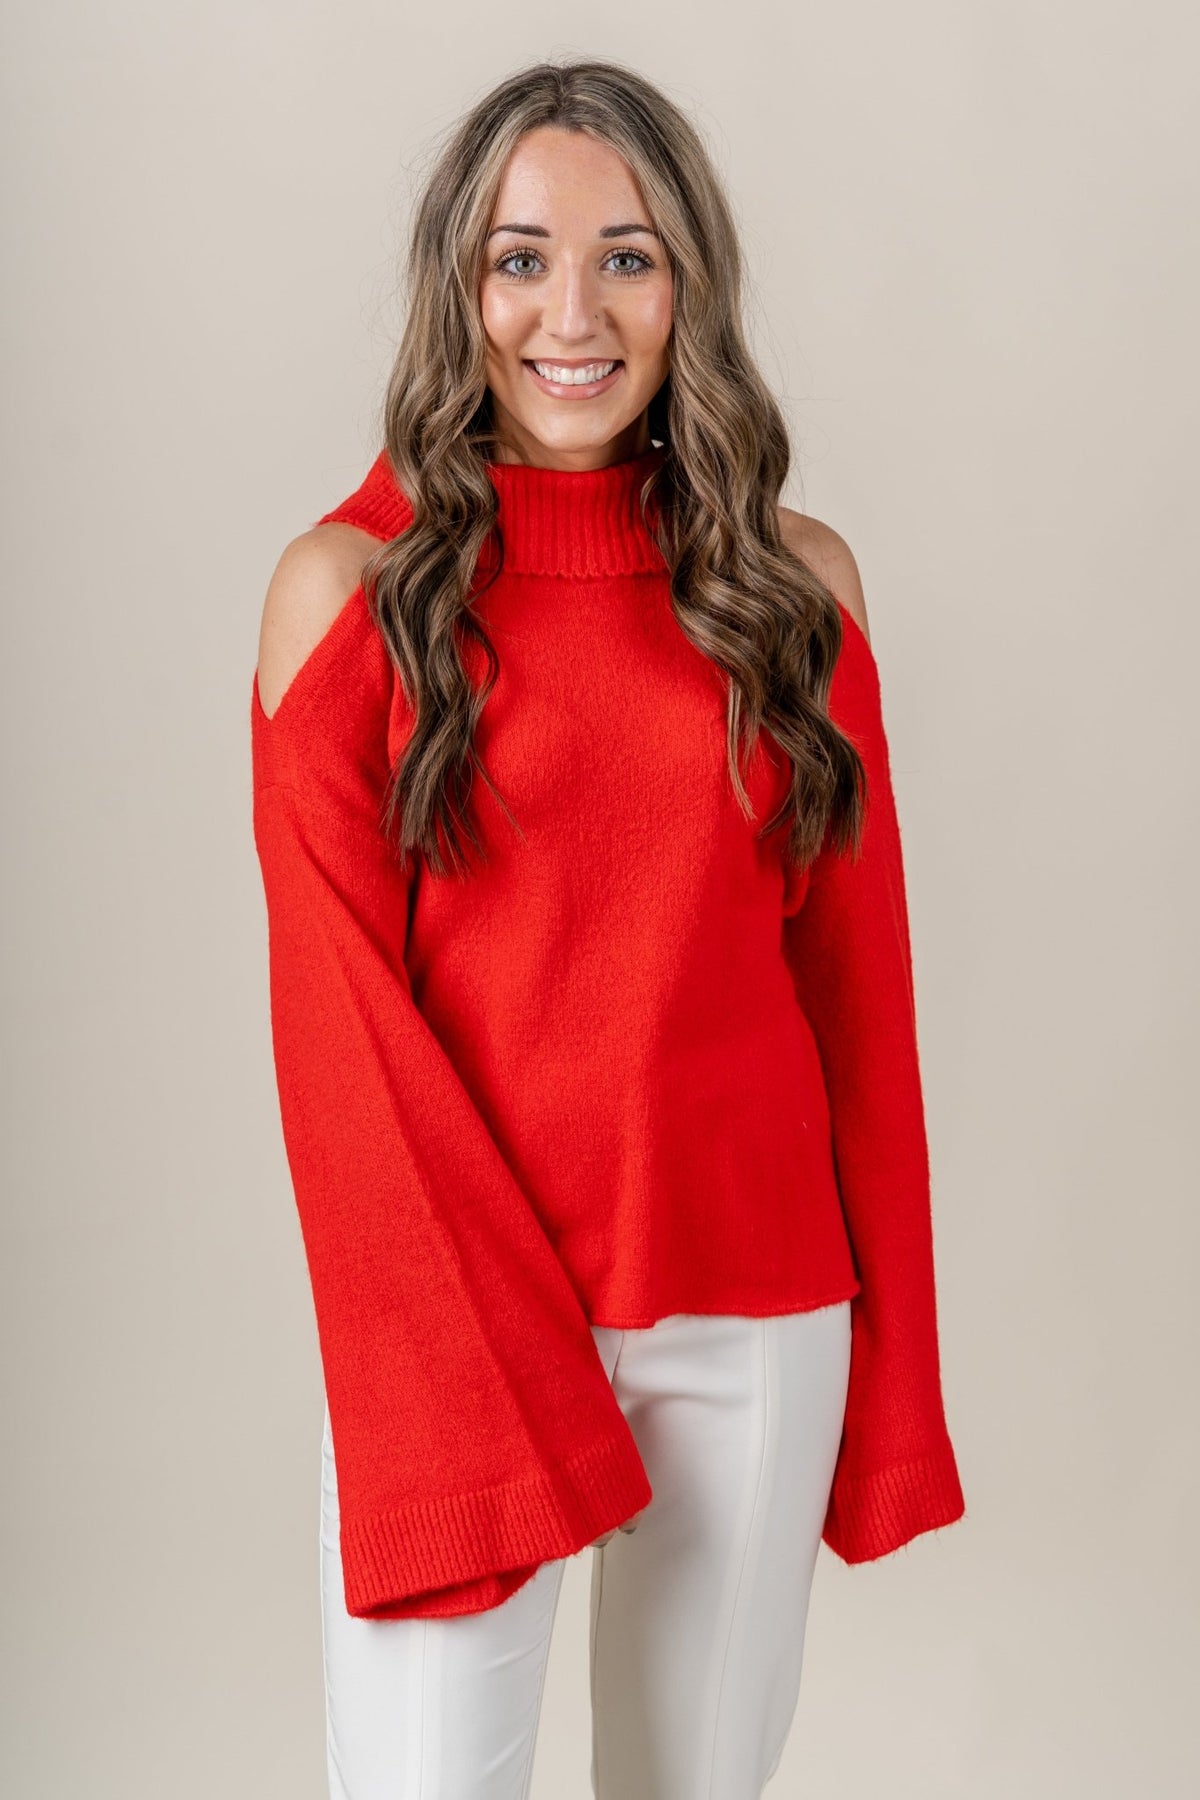 Cold shoulder sweater top red - Trendy T-Shirts for Valentine's Day at Lush Fashion Lounge Boutique in Oklahoma City